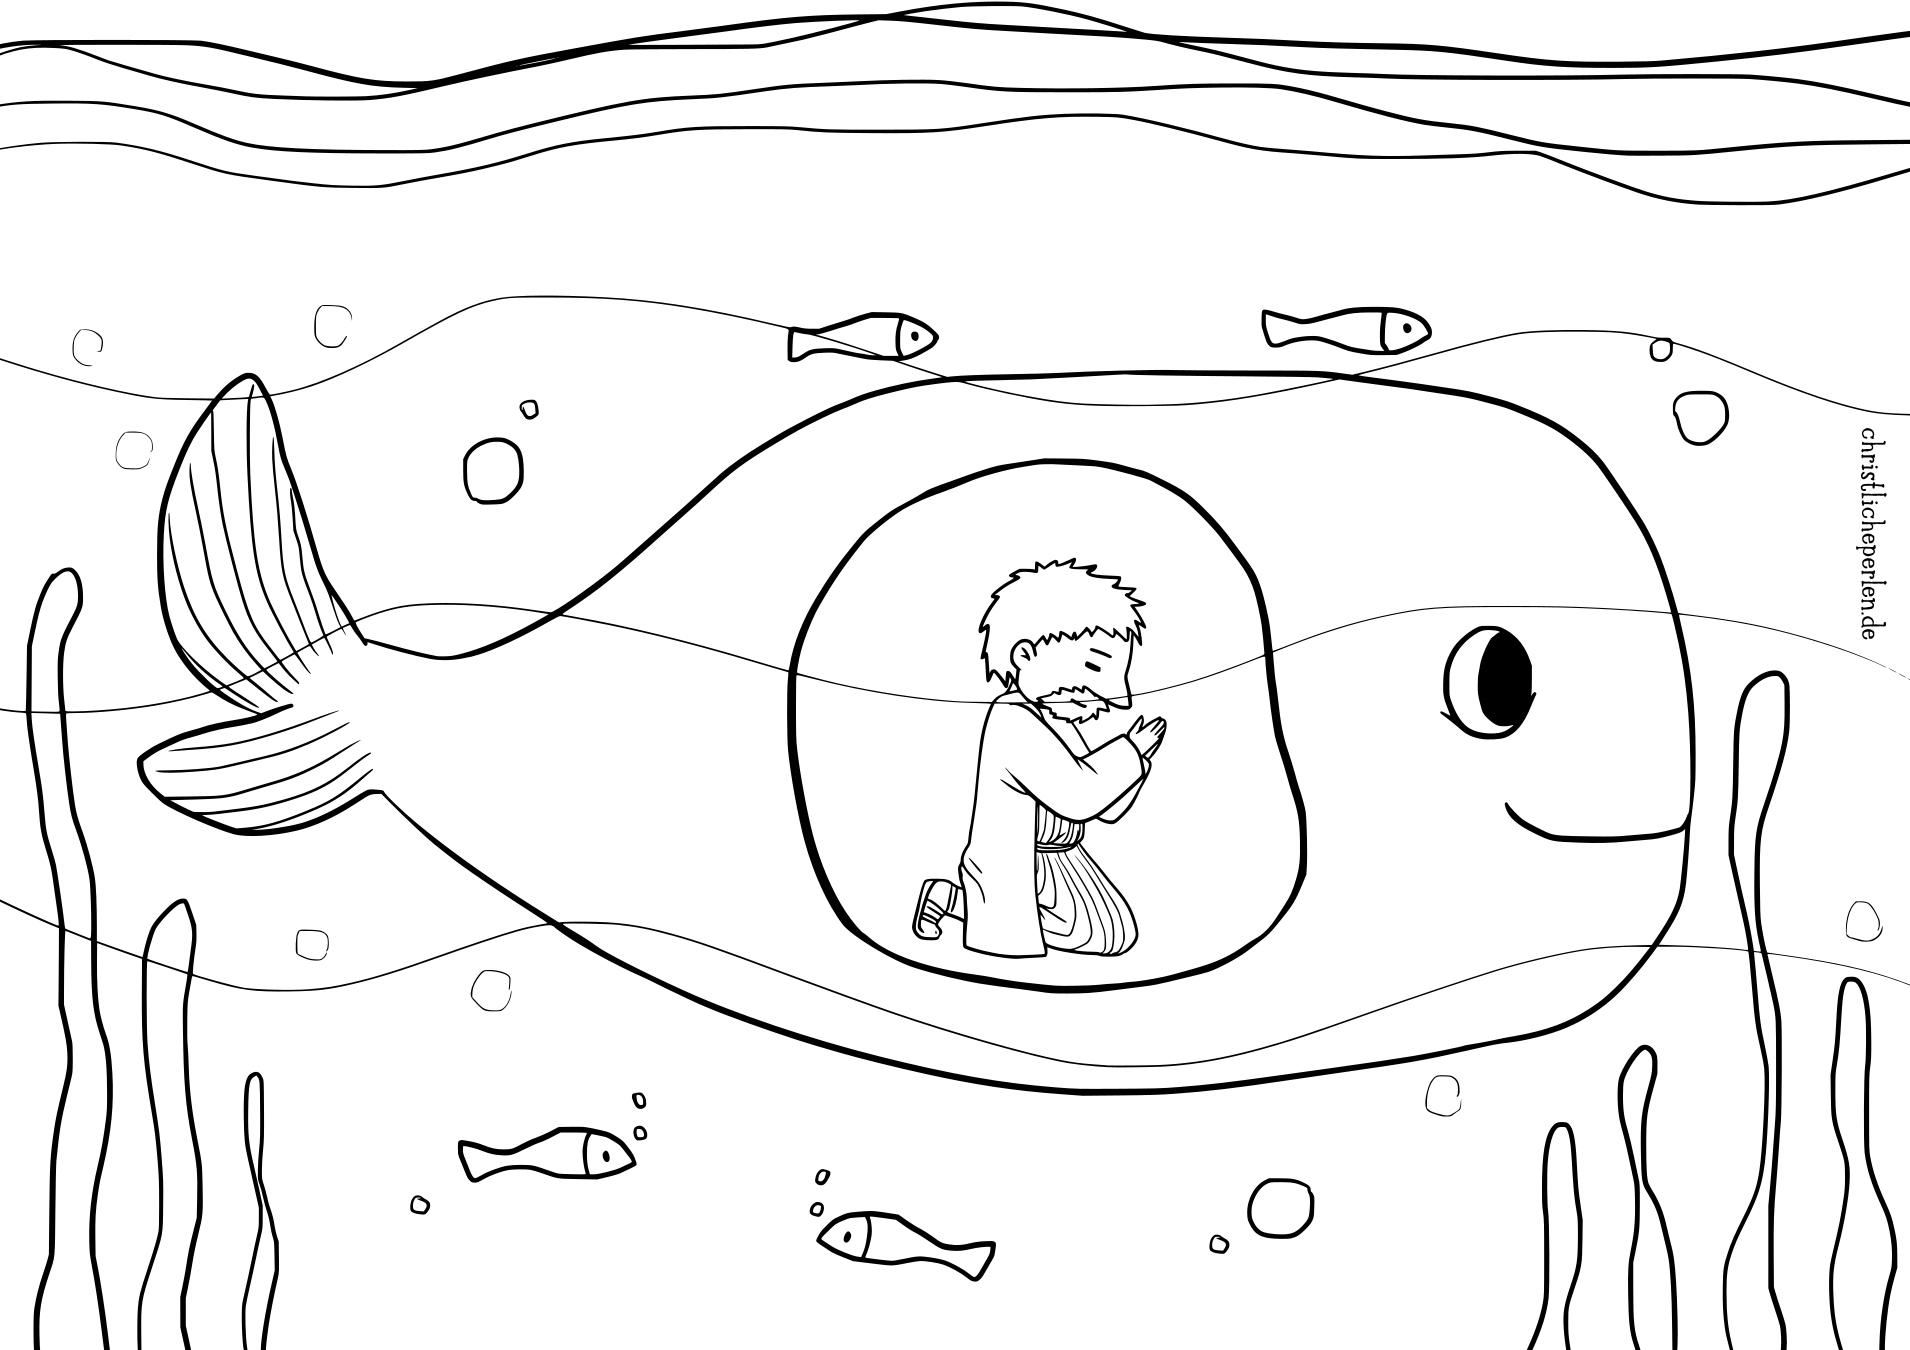 excellent-picture-of-jonah-and-the-whale-coloring-pages-entitlementtrap